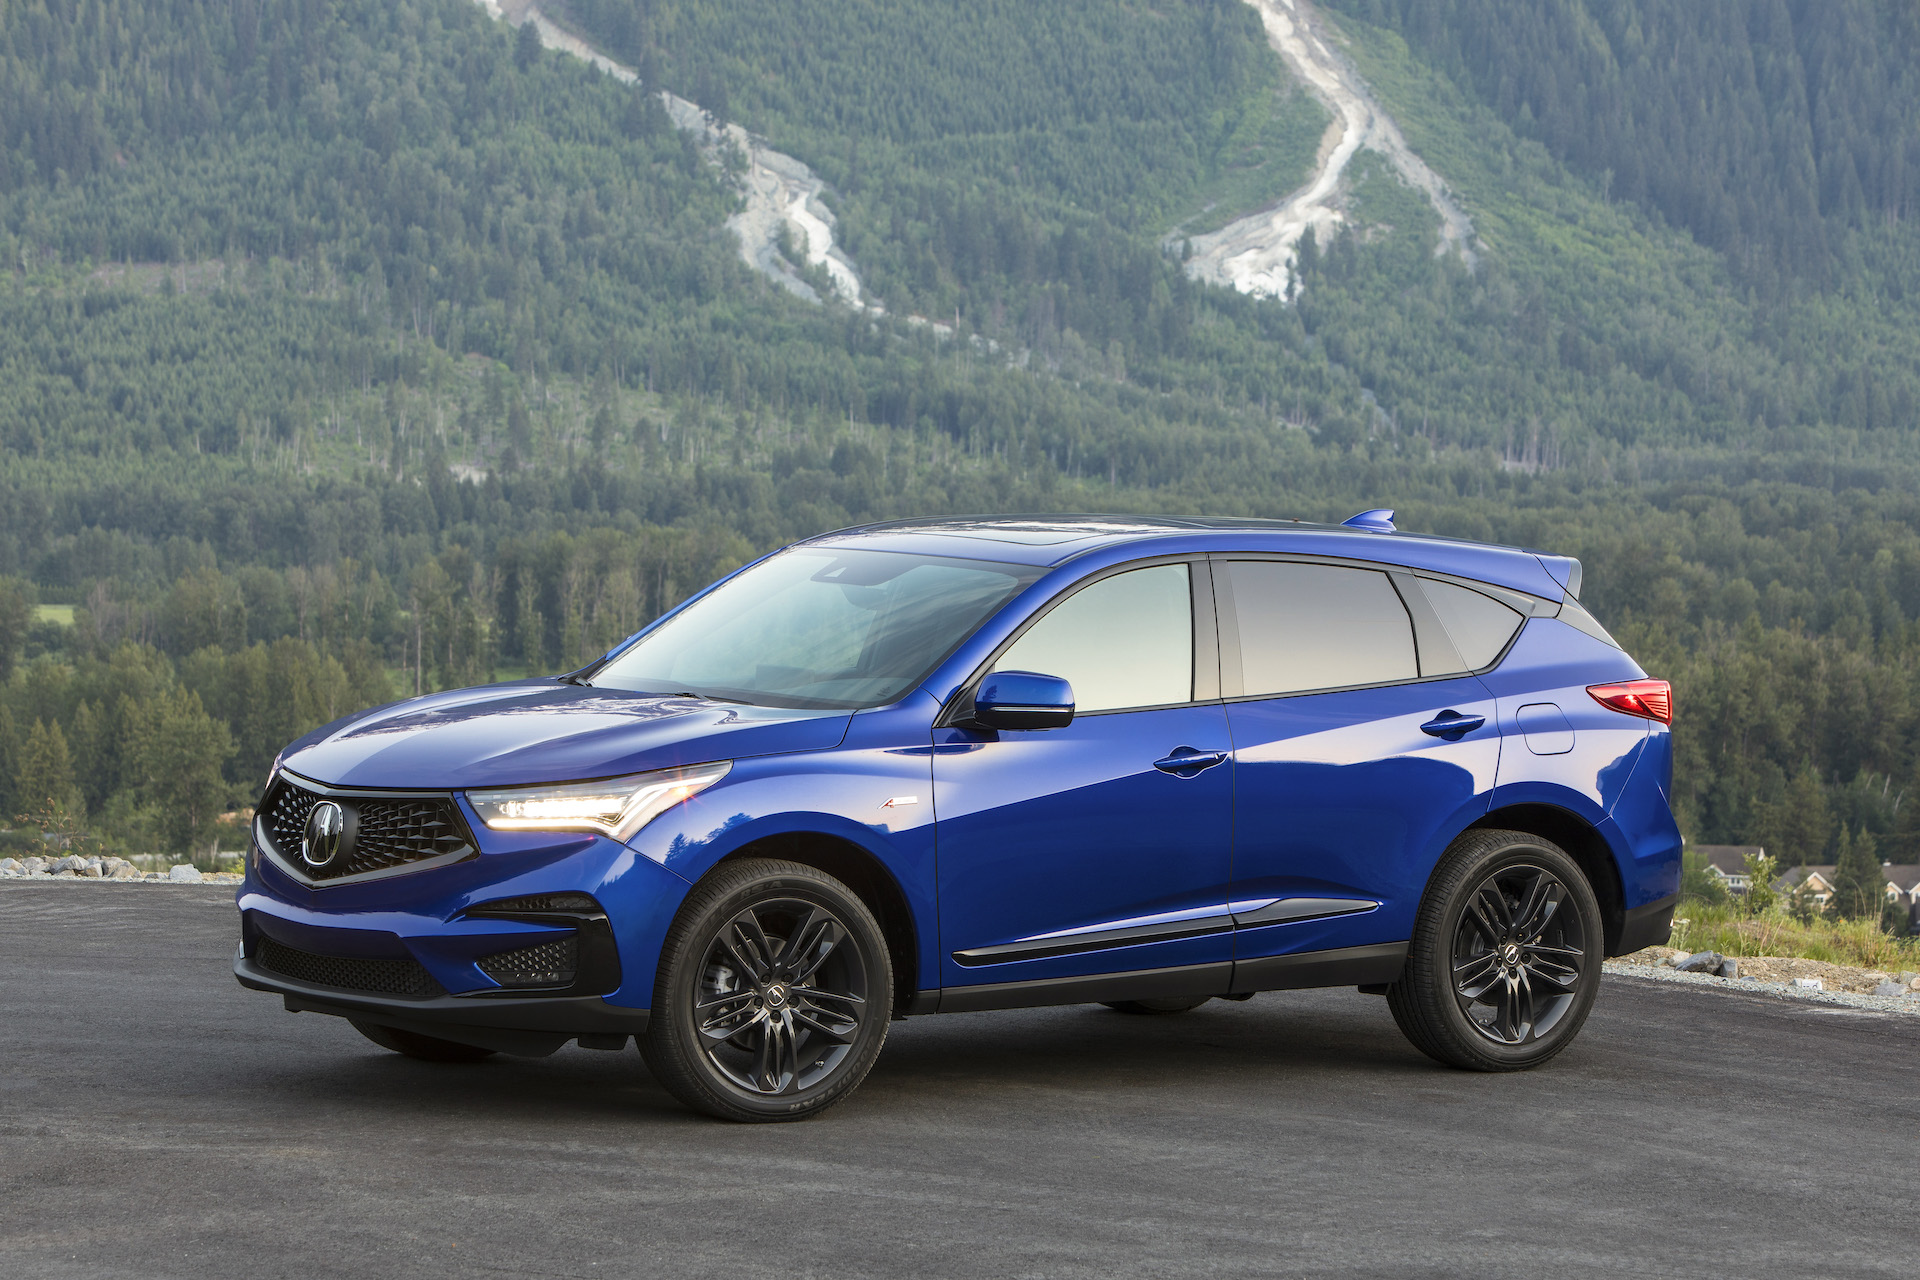 New and Used Acura RDX Prices, Photos, Reviews, Specs The Car Connection